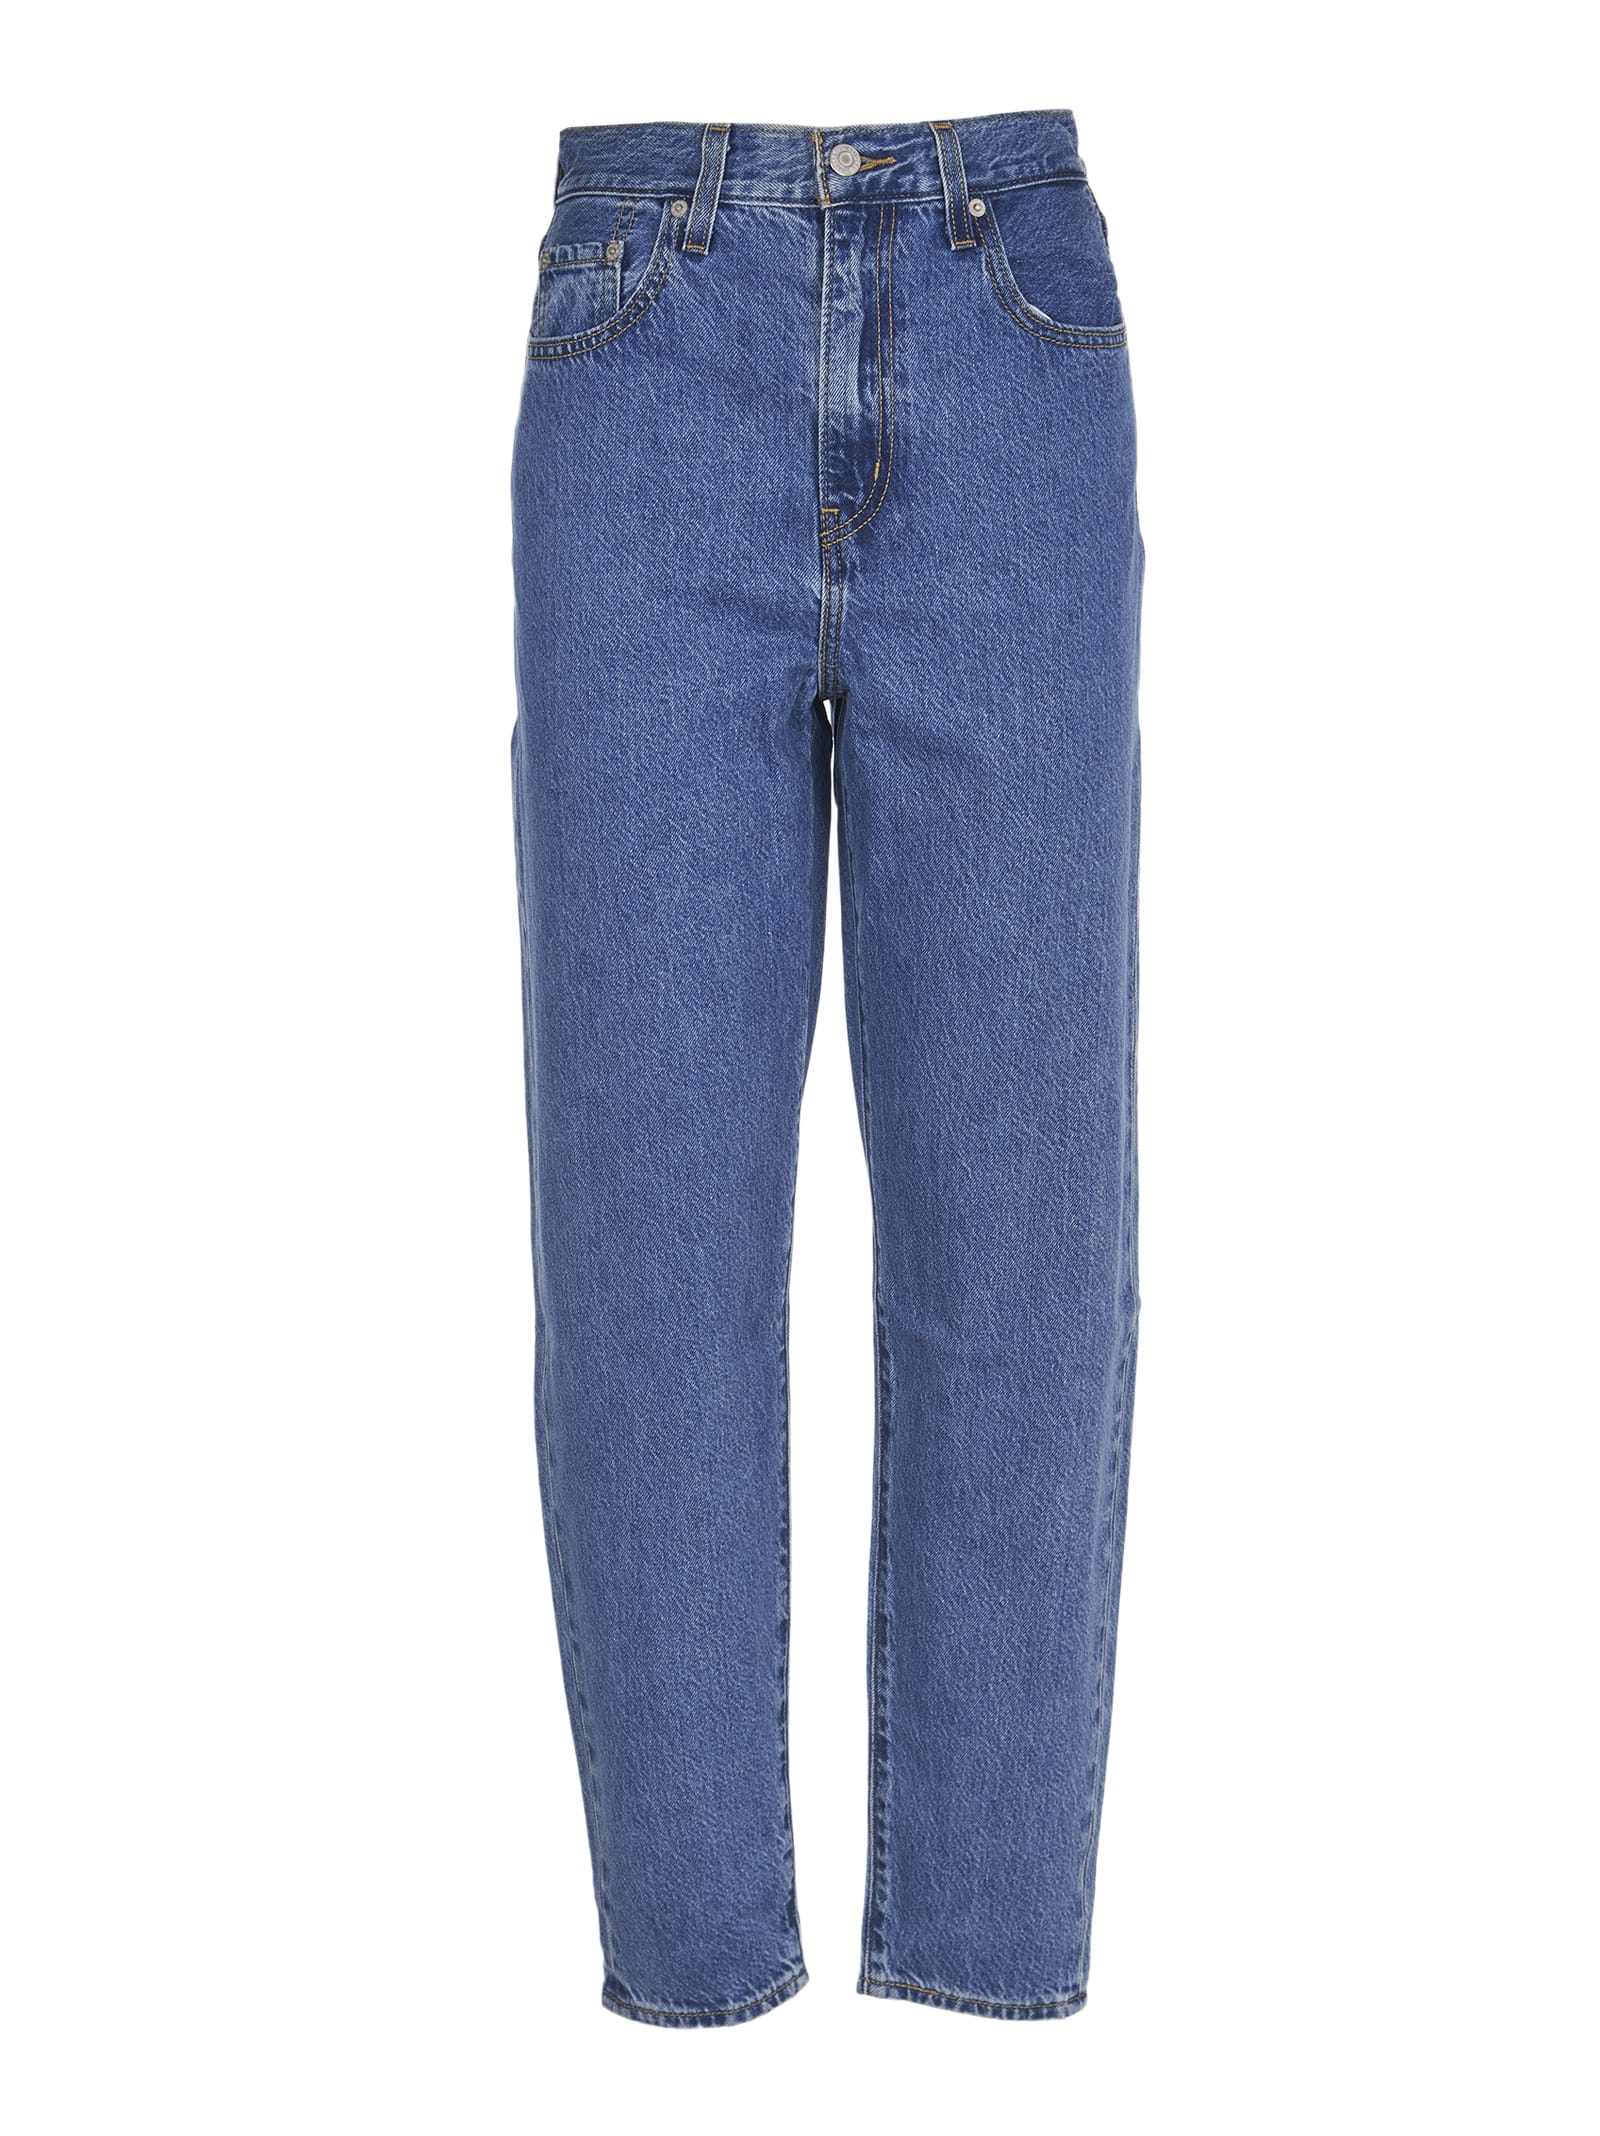 Levi's Hight Loose Taper Jeans